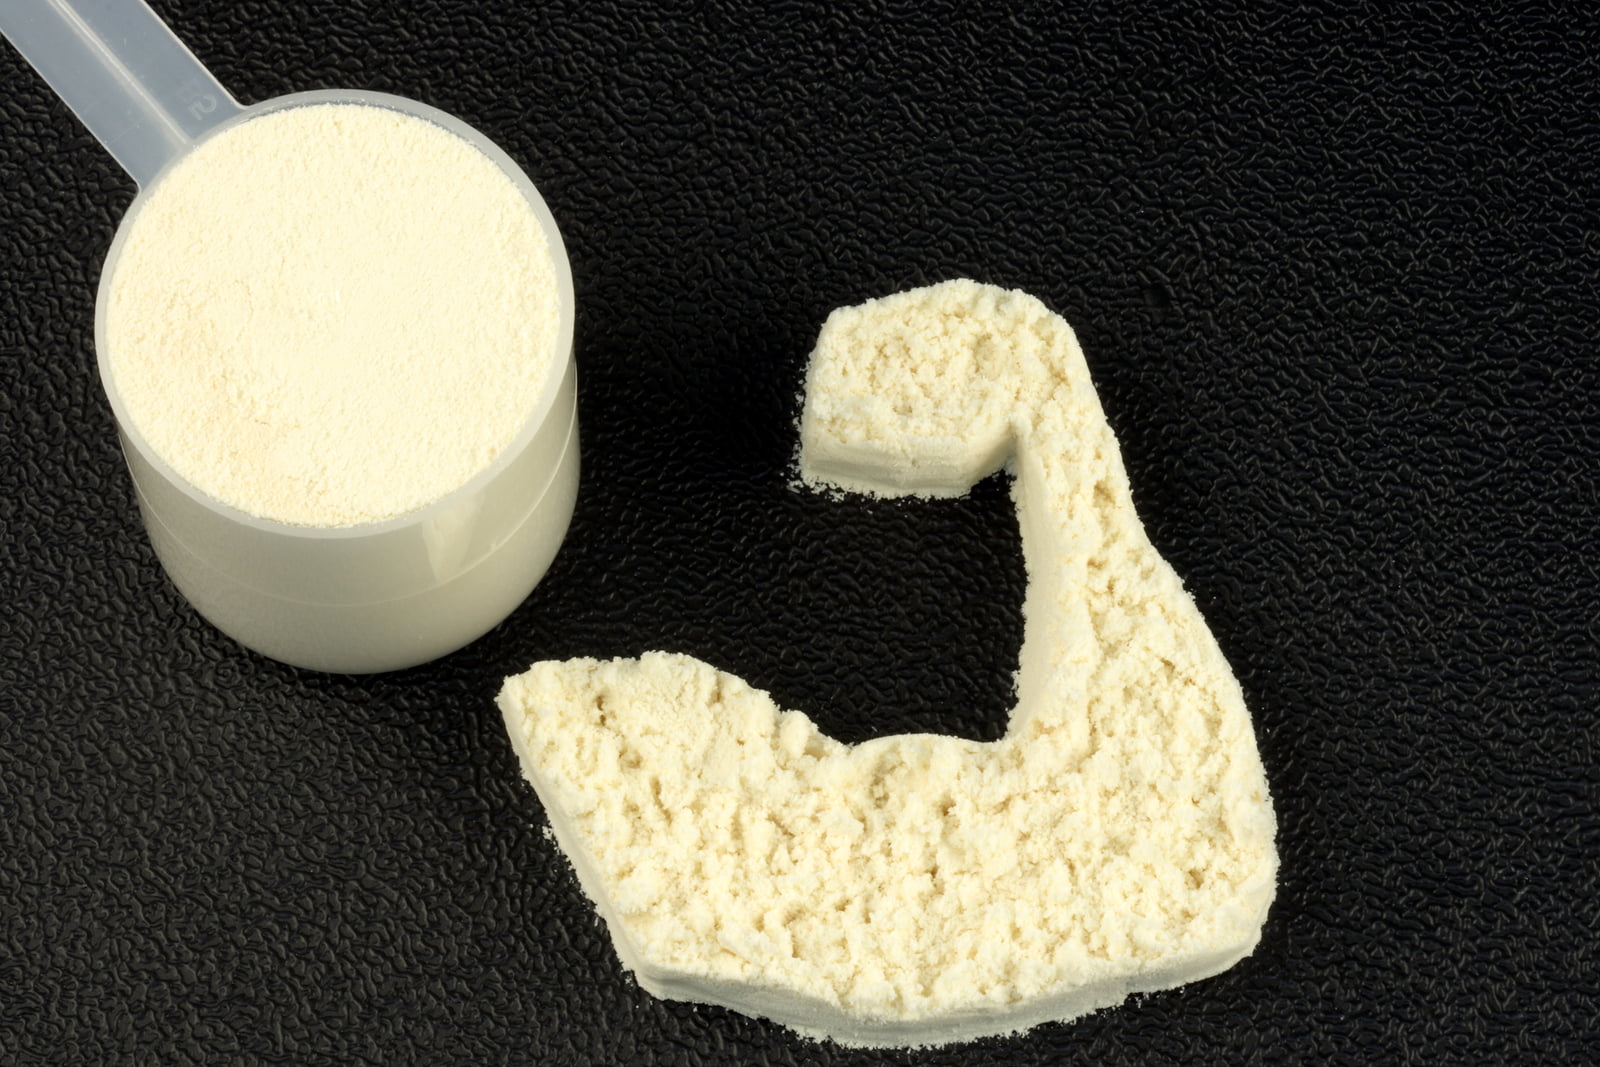 Original Whey Protein 5lbs - Best Quality Protein Ever Made